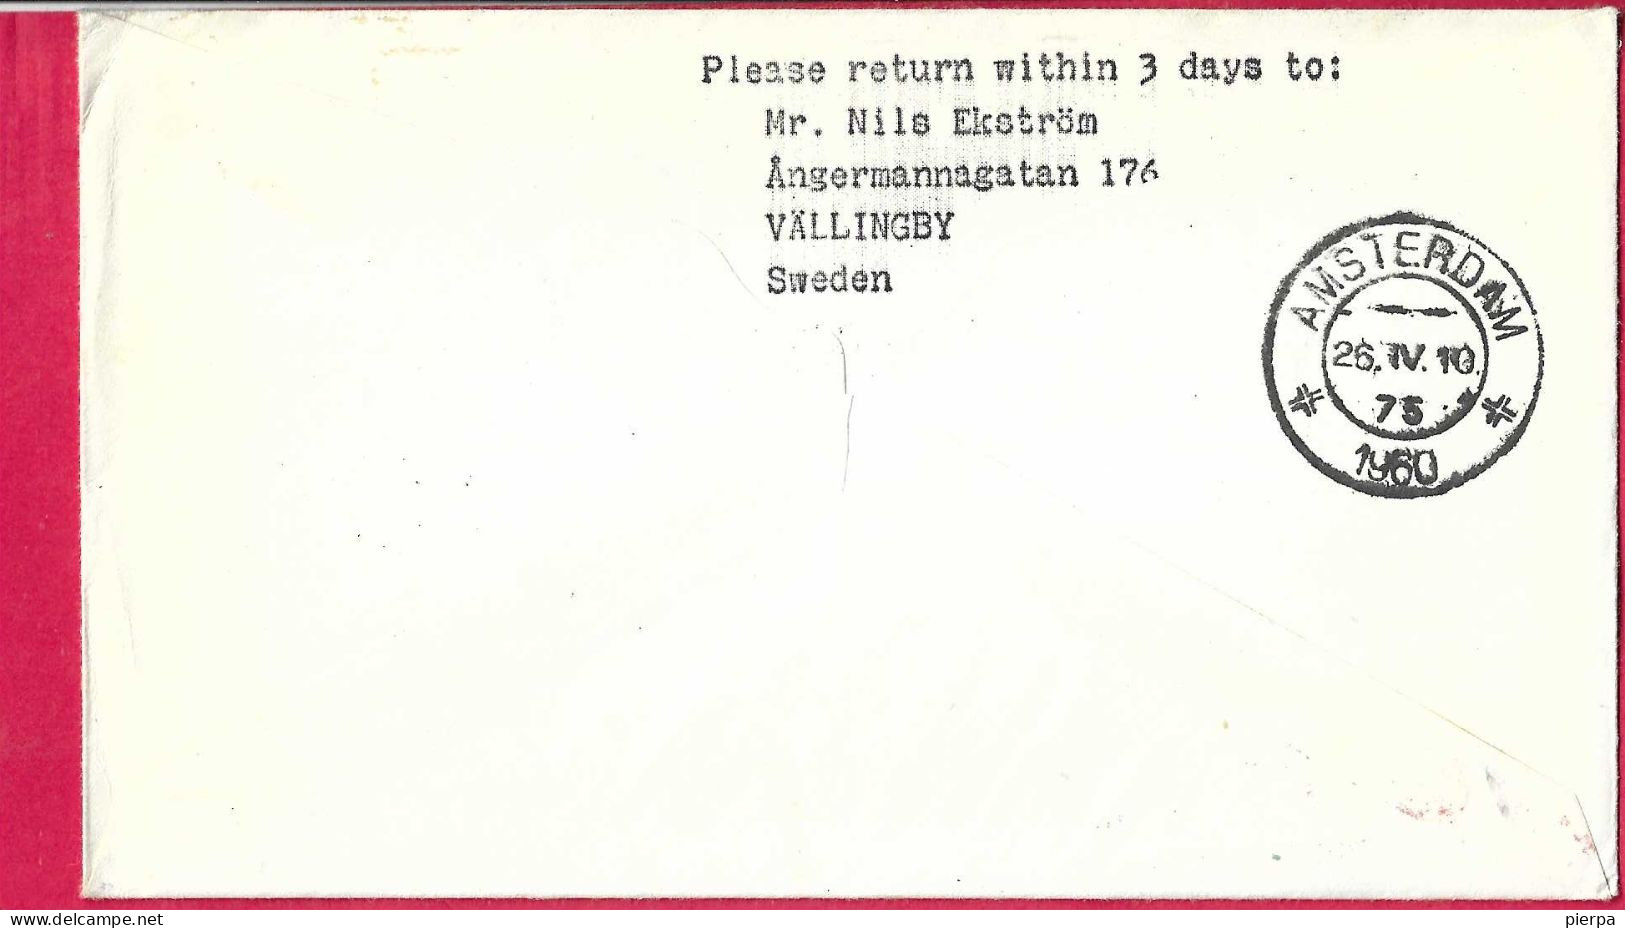 DANMARK - FIRST CARAVELLE FLIGHT - SAS - FROM KOBENHAVN TO AMSTERDAM *25.4.60* ON OFFICIAL COVER - Poste Aérienne